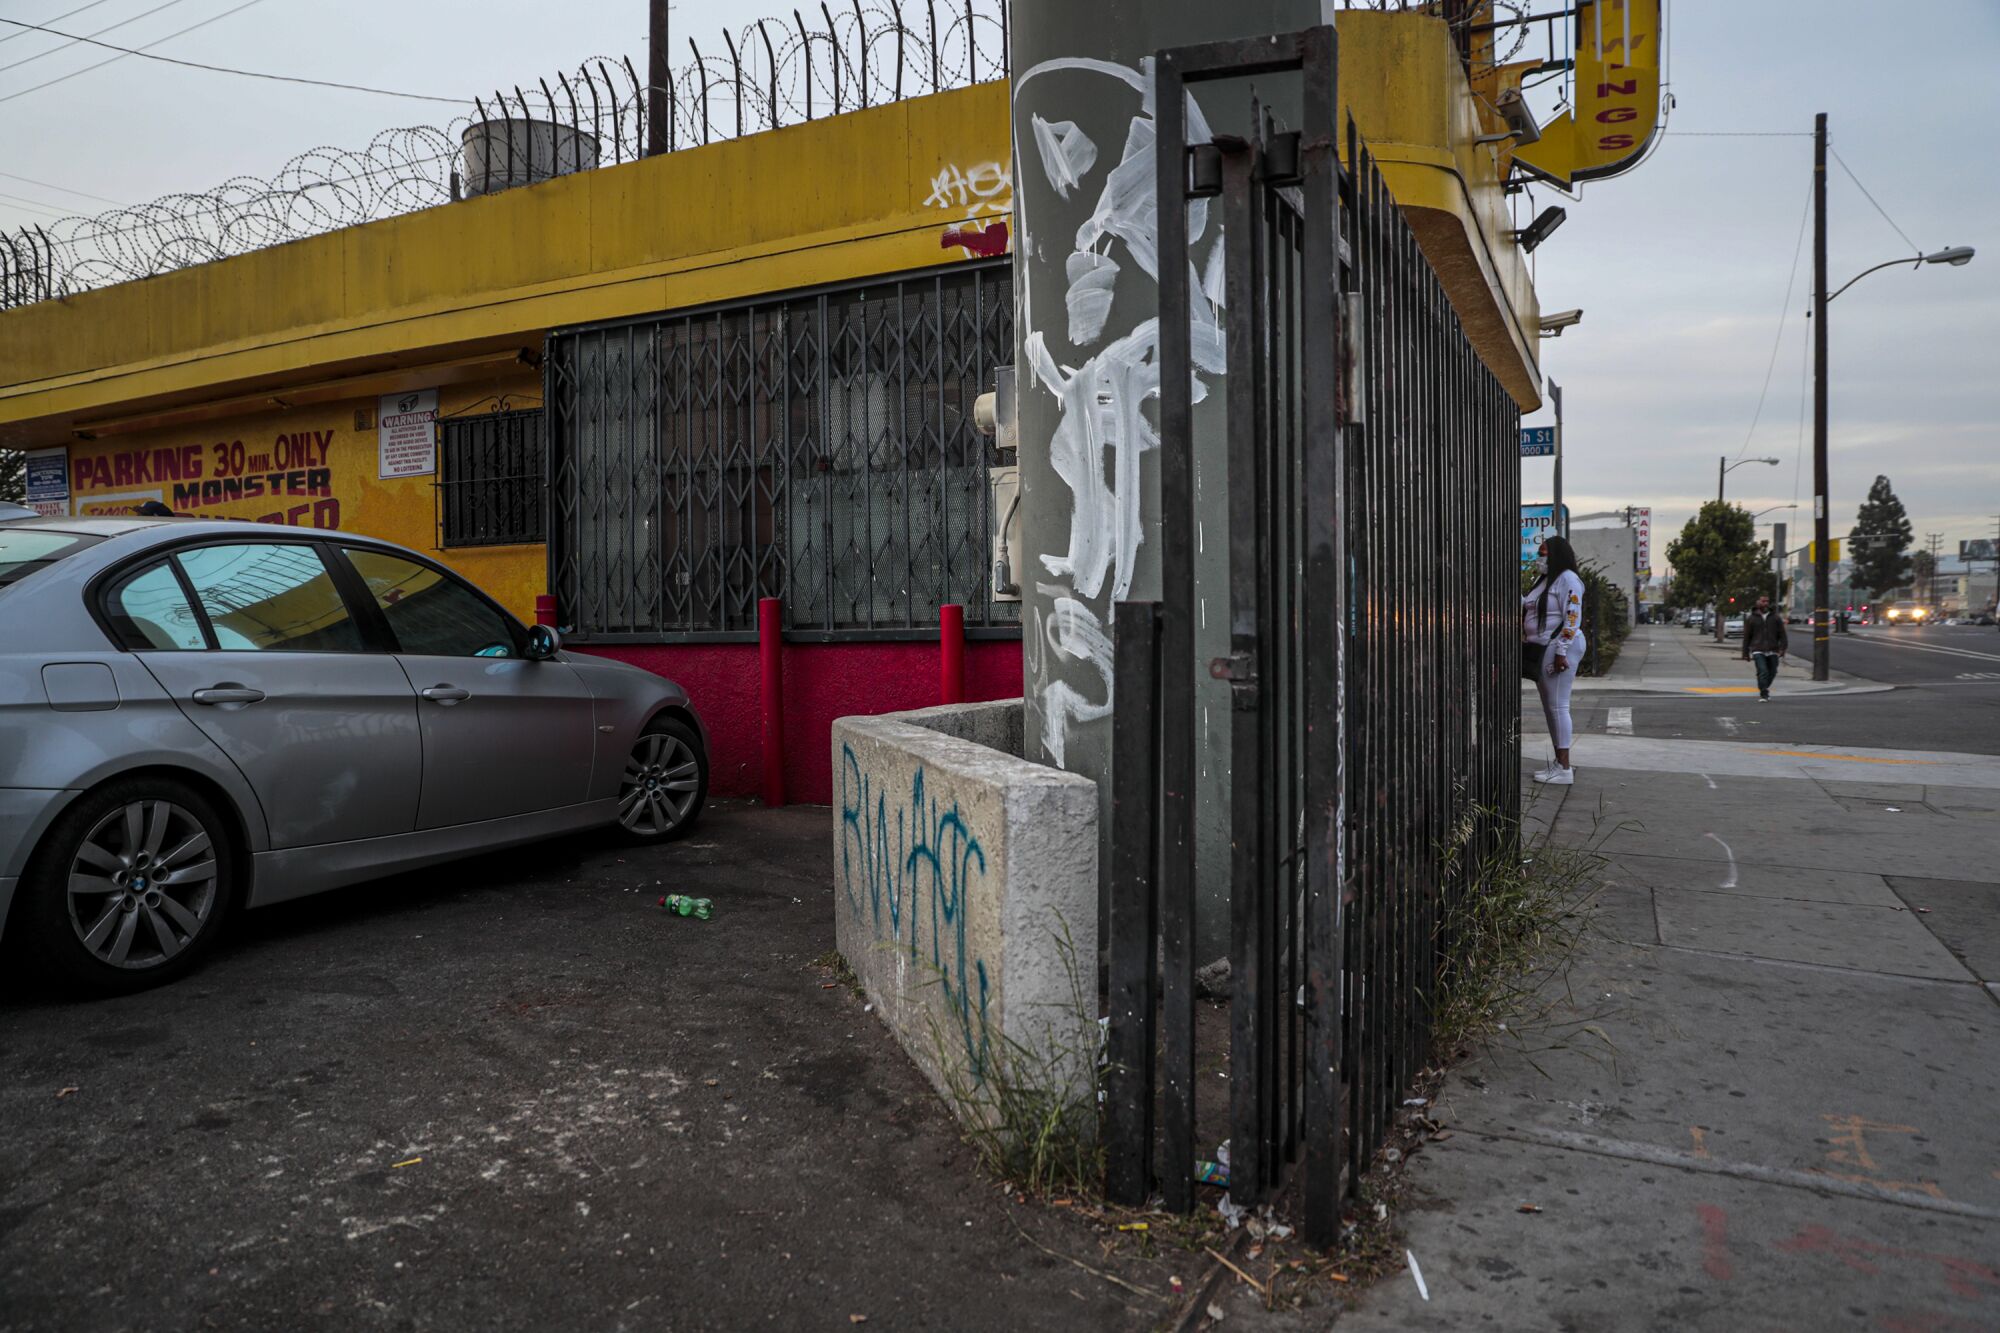 A burger joint sits in a parking lot with graffiti-tagged concrete barriers, bars on the windows and a security gate.